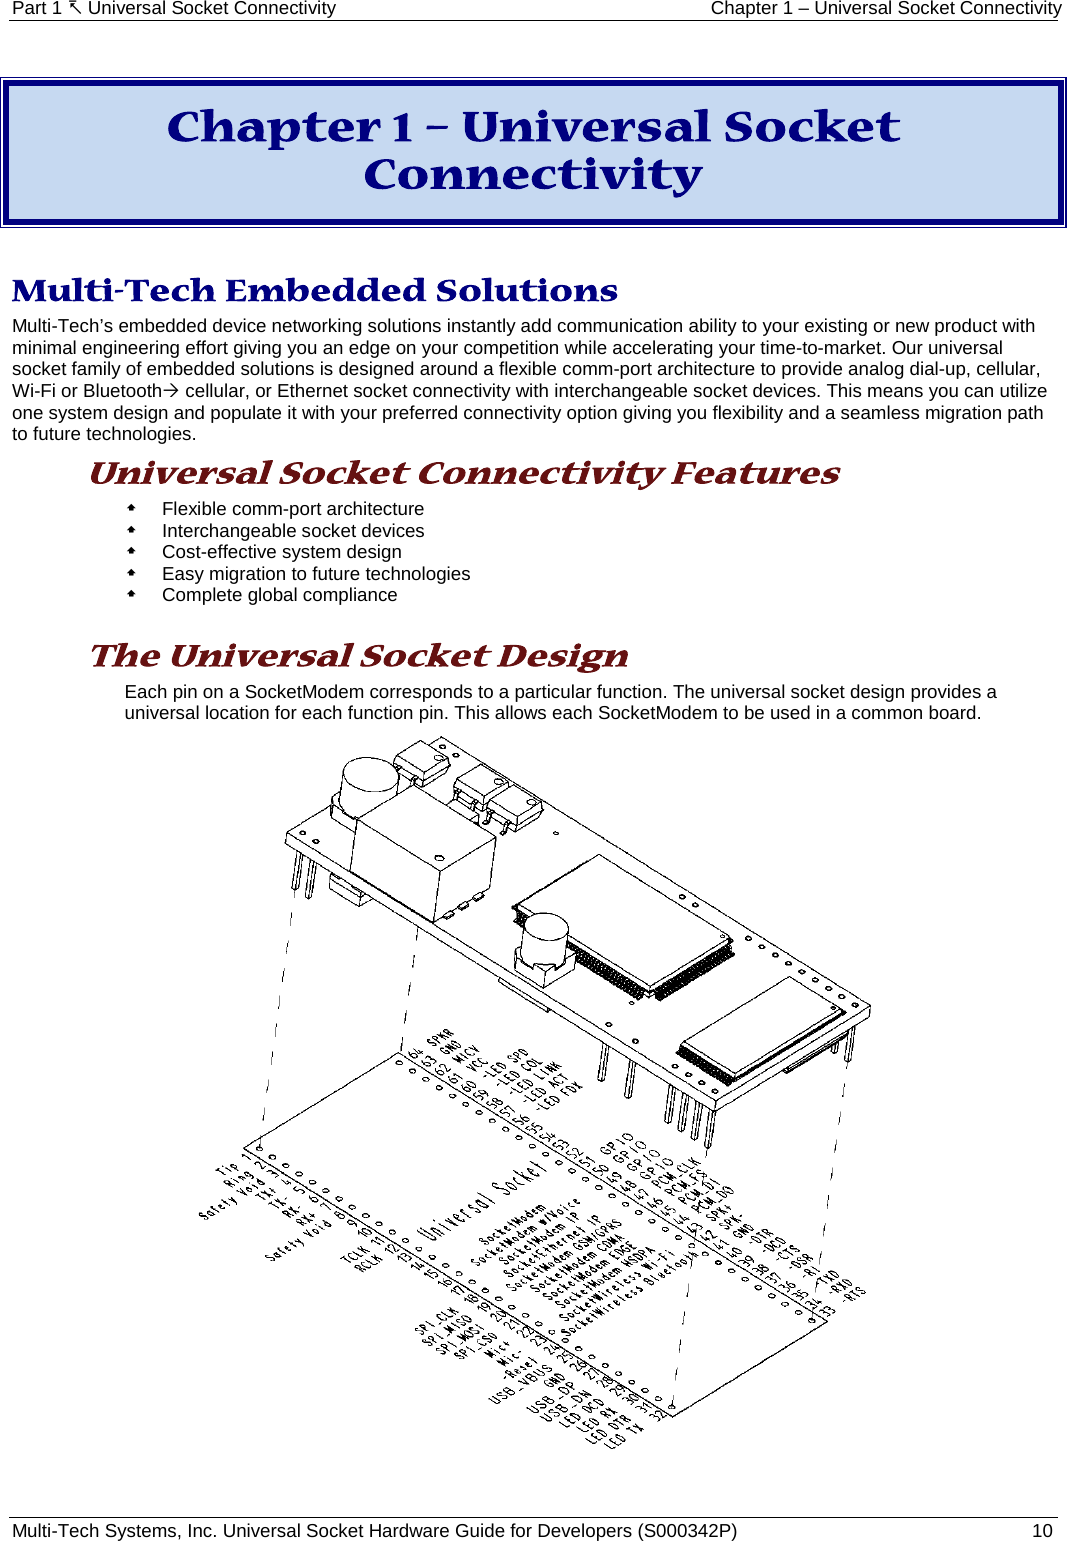 Part 1  Universal Socket Connectivity Chapter 1 – Universal Socket Connectivity Multi-Tech Systems, Inc. Universal Socket Hardware Guide for Developers (S000342P)  10   Chapter 1 – Universal Socket Connectivity  Multi-Tech Embedded Solutions Multi-Tech’s embedded device networking solutions instantly add communication ability to your existing or new product with minimal engineering effort giving you an edge on your competition while accelerating your time-to-market. Our universal socket family of embedded solutions is designed around a flexible comm-port architecture to provide analog dial-up, cellular, Wi-Fi or Bluetooth cellular, or Ethernet socket connectivity with interchangeable socket devices. This means you can utilize one system design and populate it with your preferred connectivity option giving you flexibility and a seamless migration path to future technologies.  Universal Socket Connectivity Features  Flexible comm-port architecture   Interchangeable socket devices  Cost-effective system design  Easy migration to future technologies  Complete global compliance  The Universal Socket Design  Each pin on a SocketModem corresponds to a particular function. The universal socket design provides a universal location for each function pin. This allows each SocketModem to be used in a common board.     